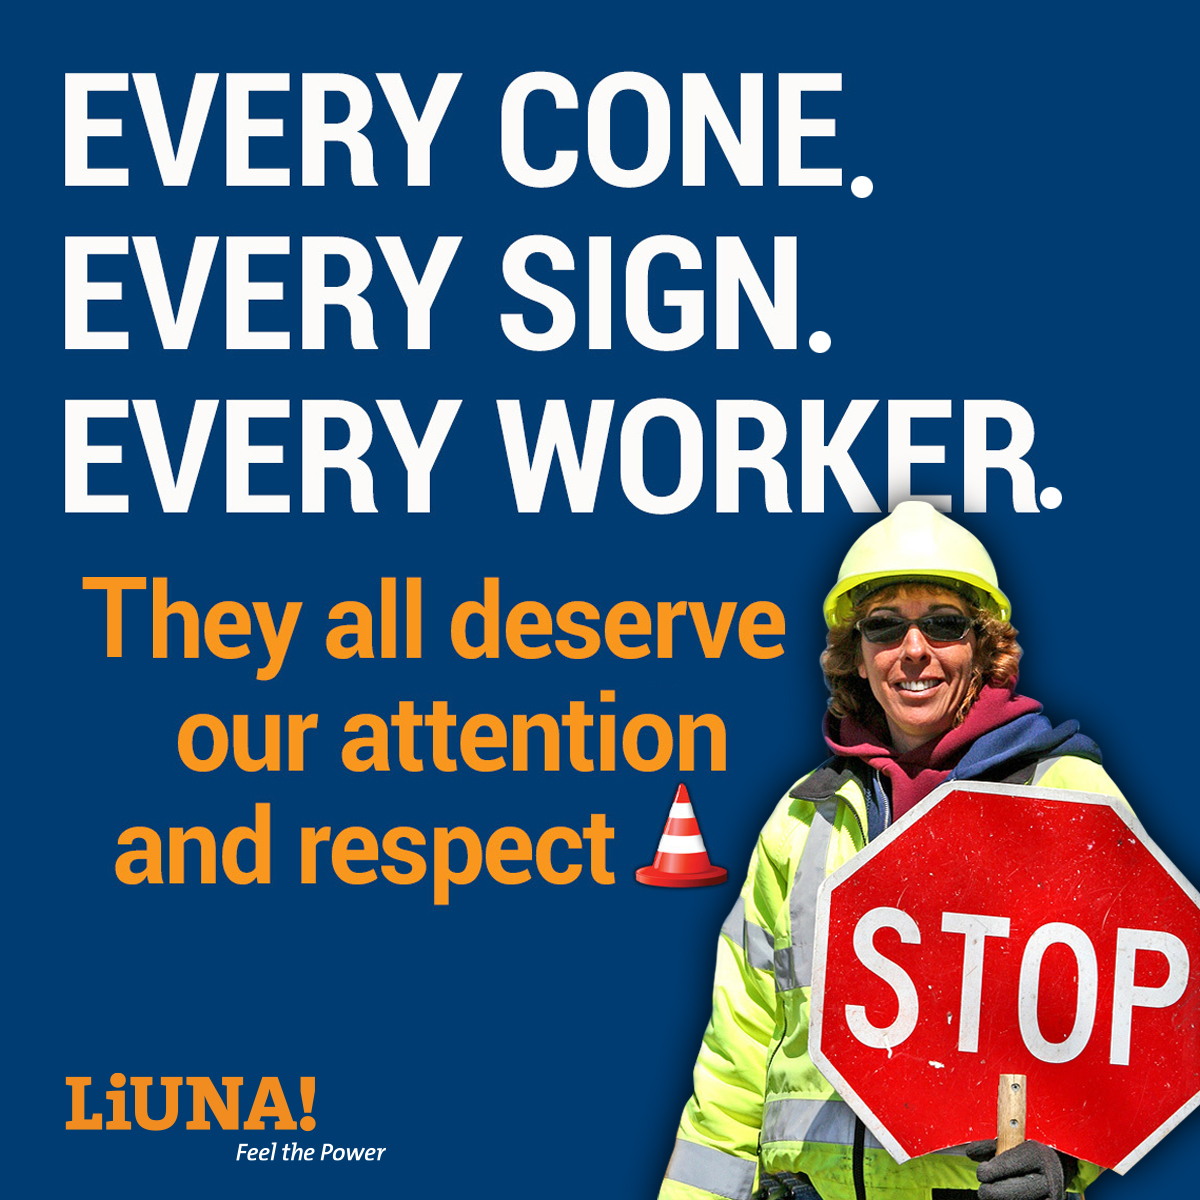 #WorkZoneSafety is everyone's responsibility. #SlowDown, #StayAlert, and follow signs to protect workers & yourself. Let’s all work together to keep everyone safe by using extra caution in #WorkZones!

#RoadConstruction #LIUNA